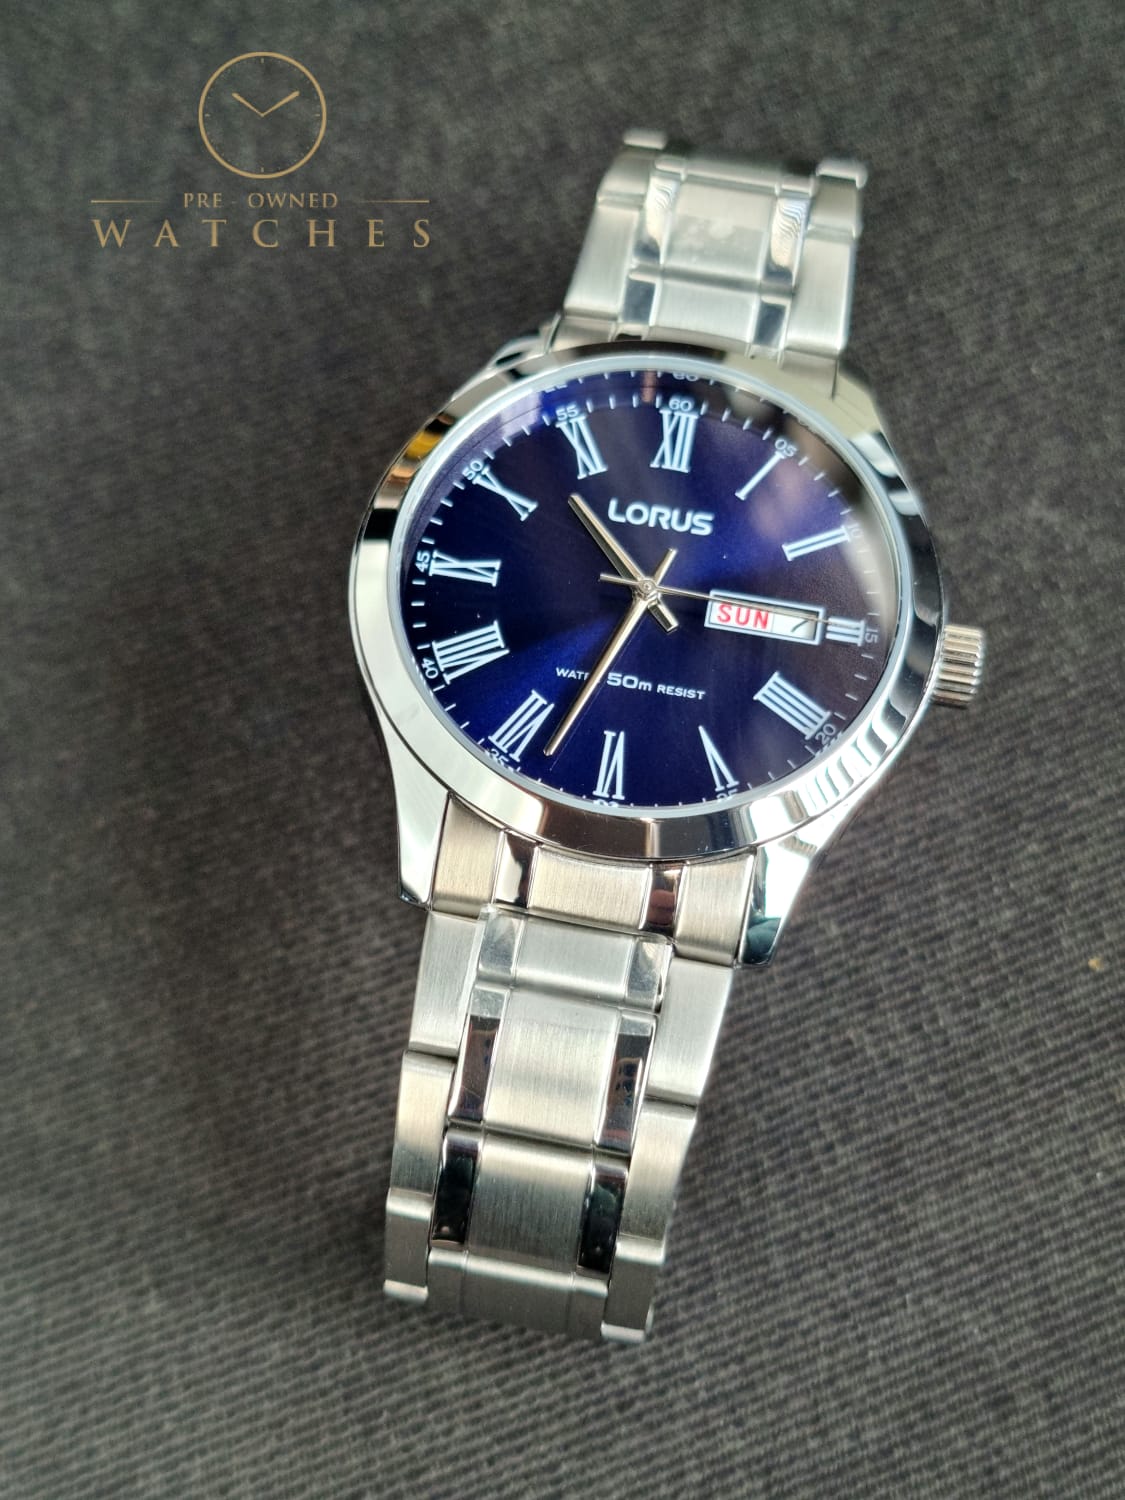 Lorus Sub Brand OF Seiko Gents Watch Blue dial 40mm Dial Size